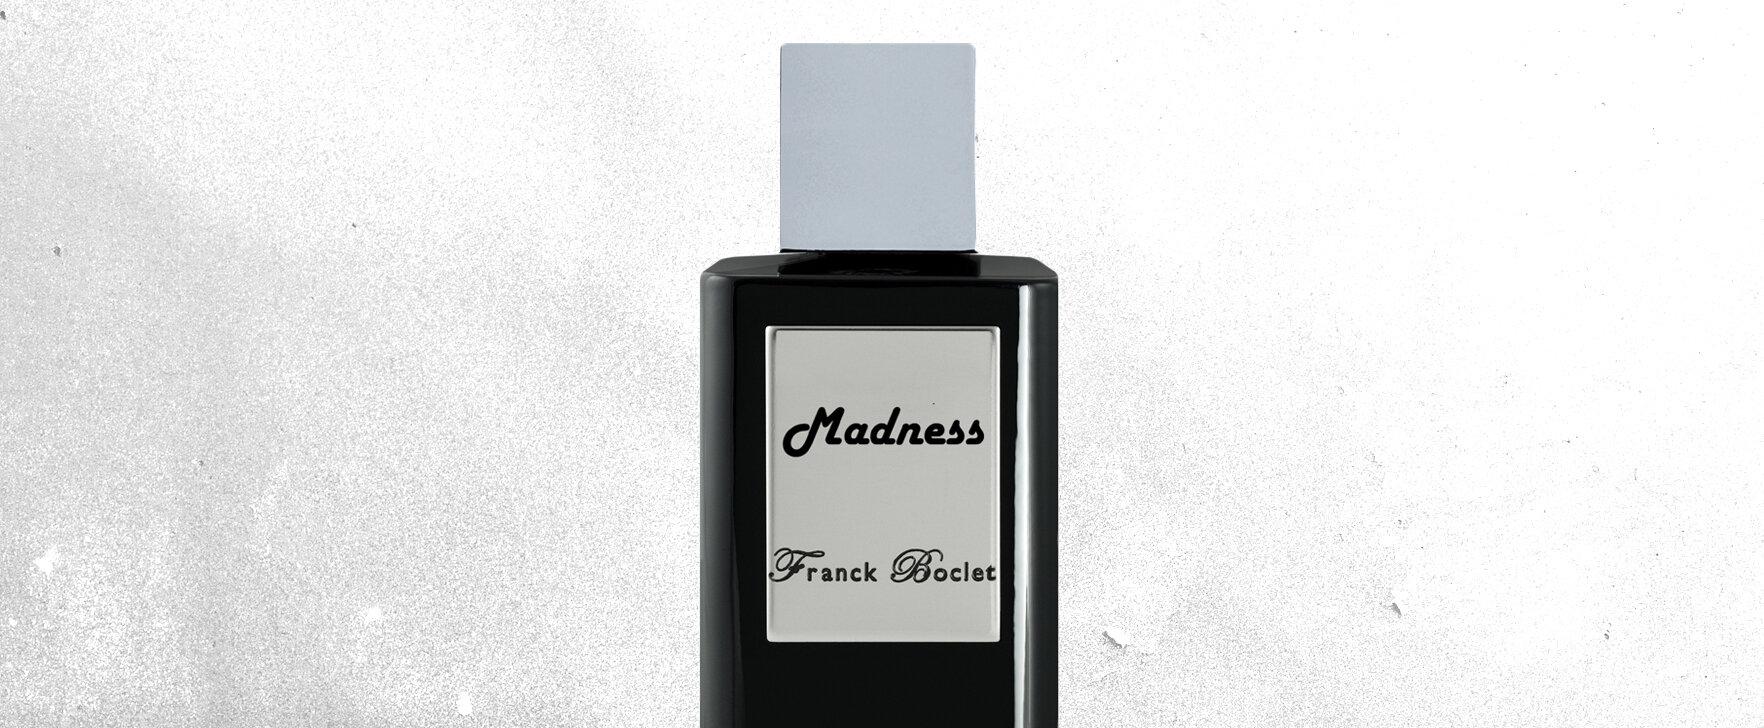 An Ode to the British Ska Band: The New "Madness" Extrait de Parfum by Franck Boclet